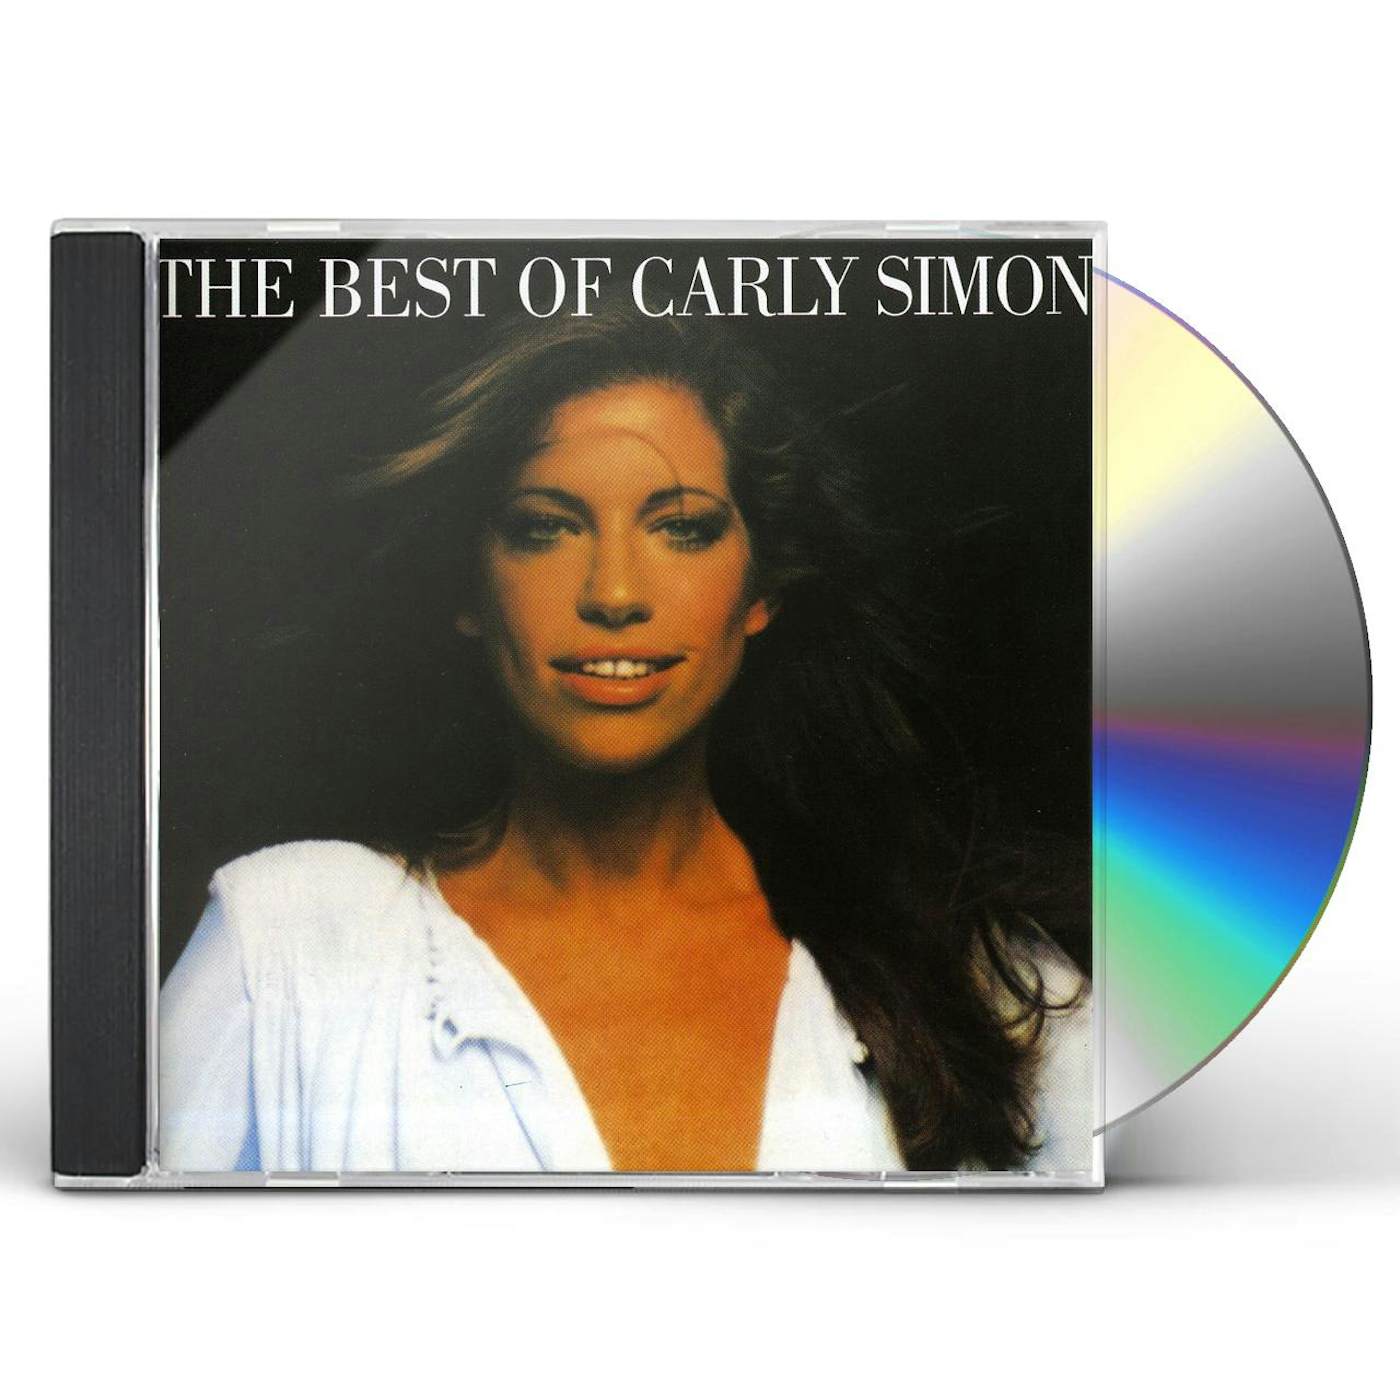 BEST OF Carly Simon CD